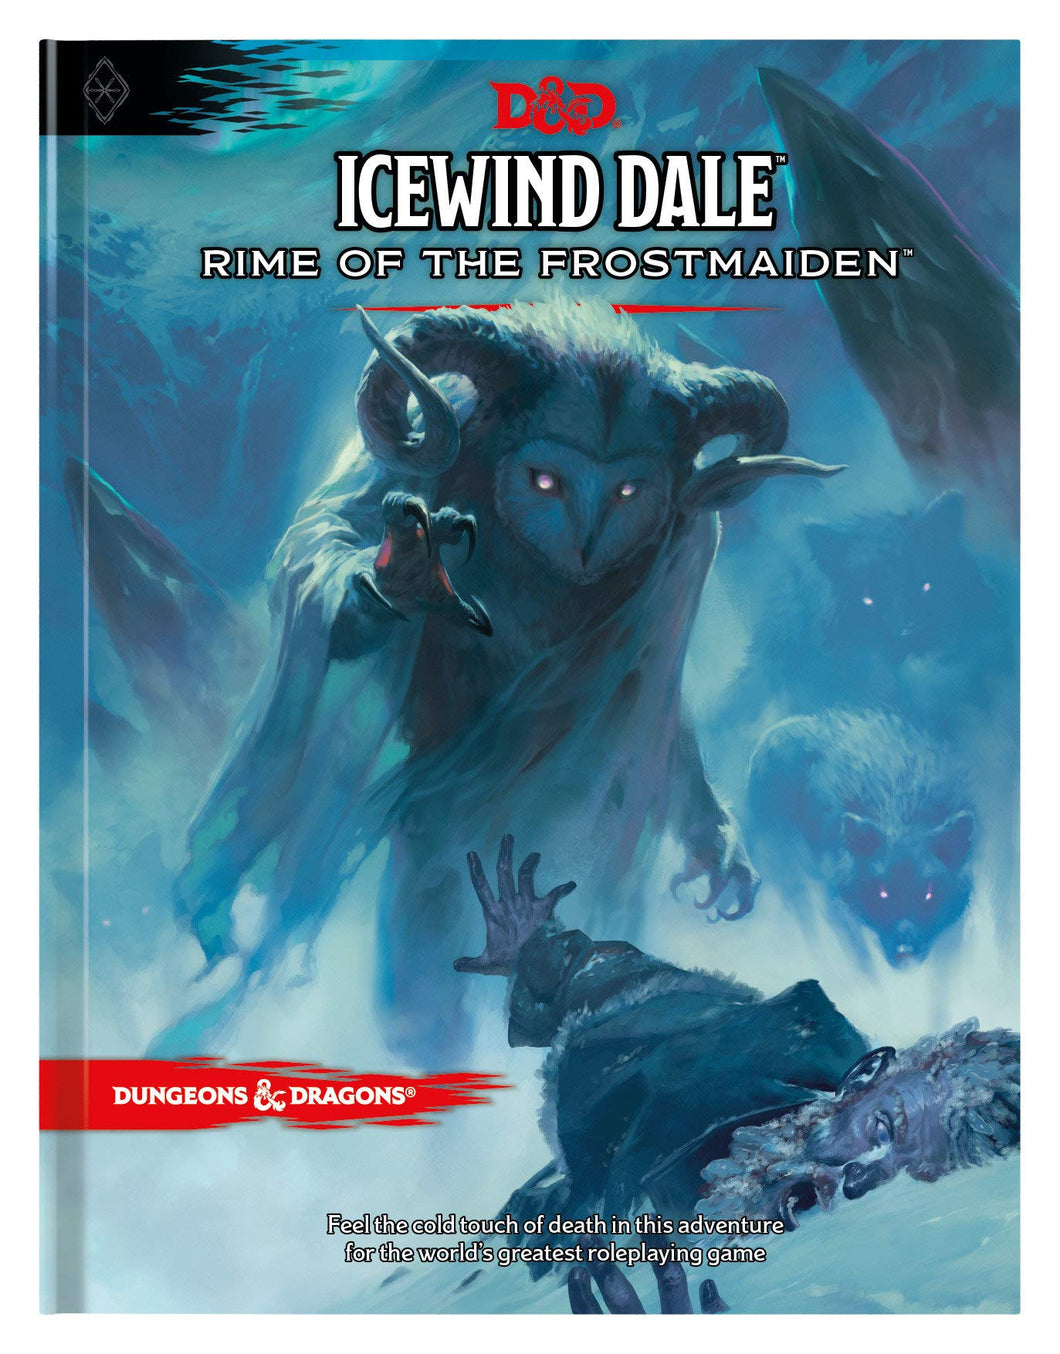 Dungeons & Dragons Icewind Dale Rime of the Frost Maiden Book